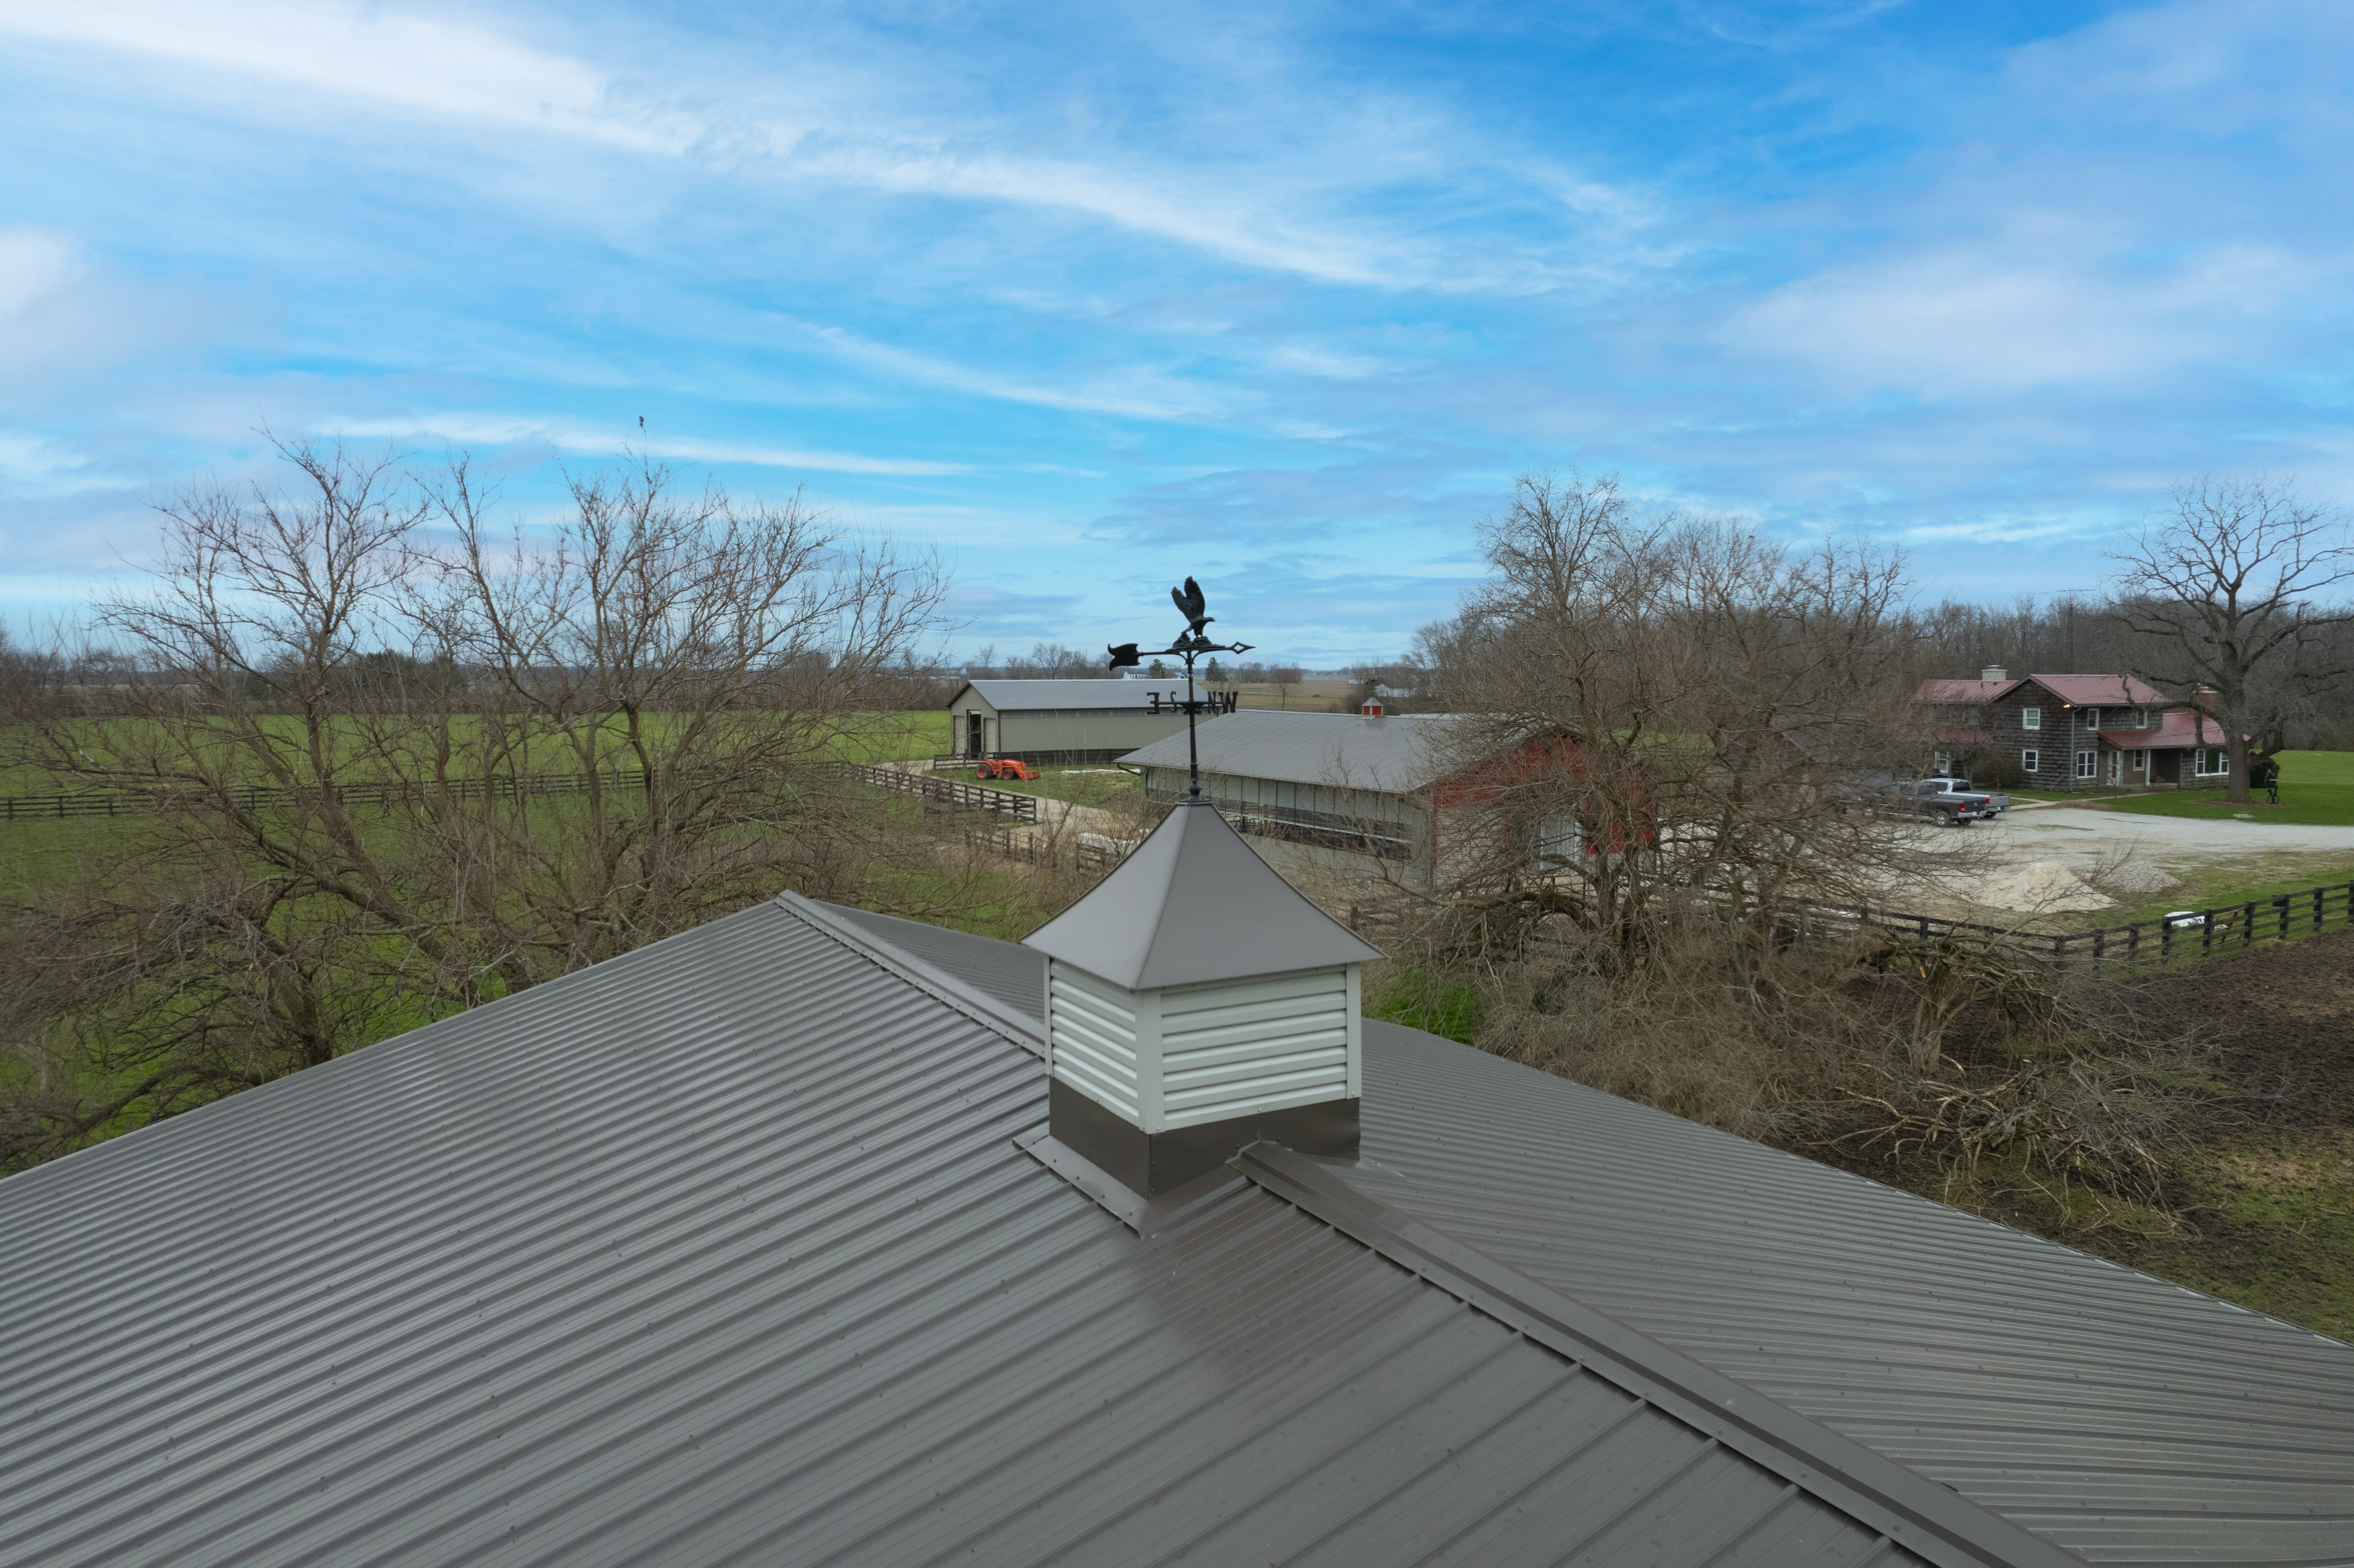 5 Details to Consider When Adding a Cupola to Your Pole Barn